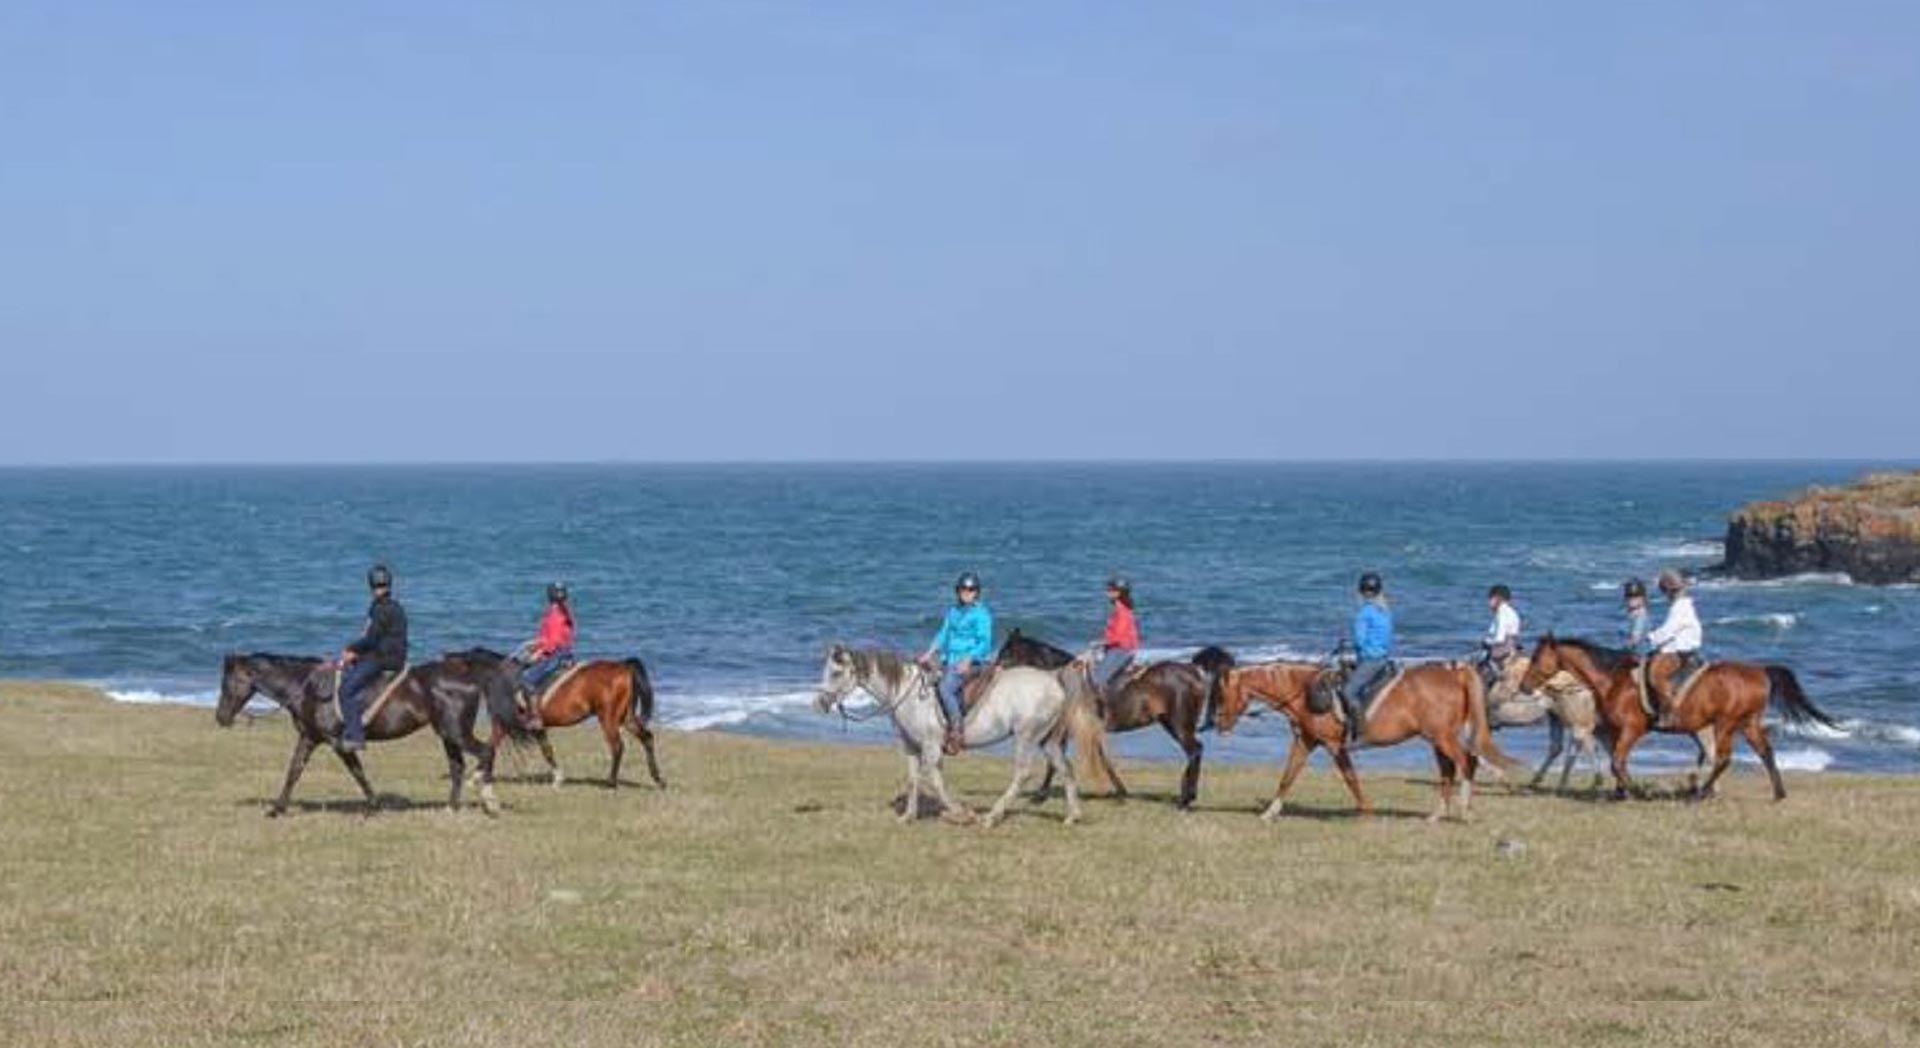 Horse Riding Adventures in Australia From the Latest Edition of 